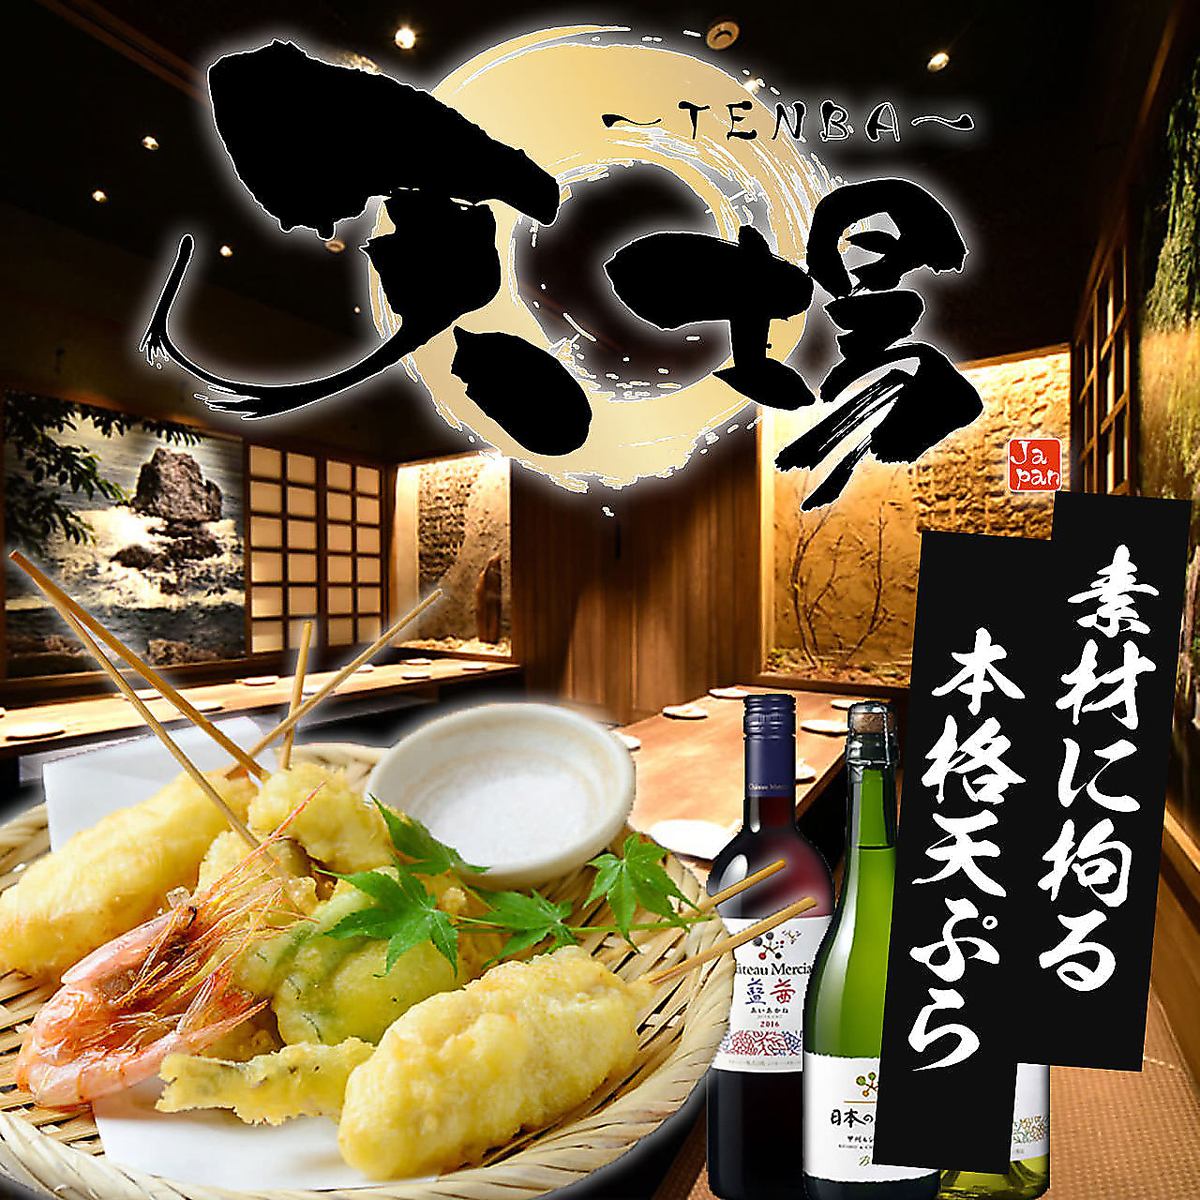 Fully equipped with private rooms, you can enjoy tempura, mainly seafood and meat.